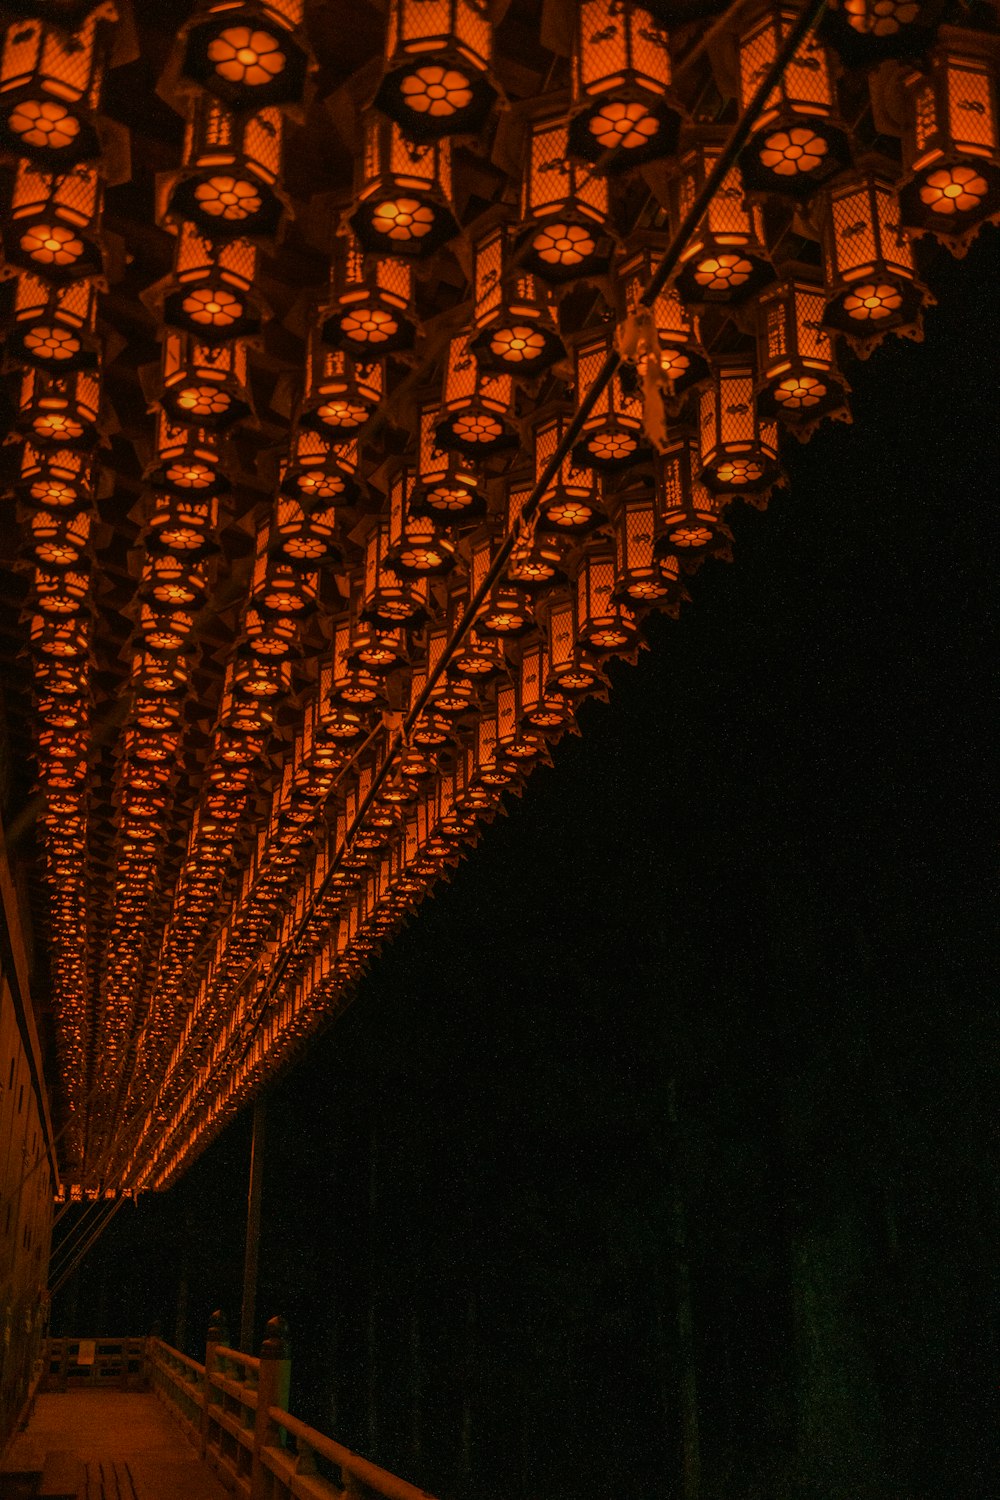 a long line of lanterns lit up in the dark